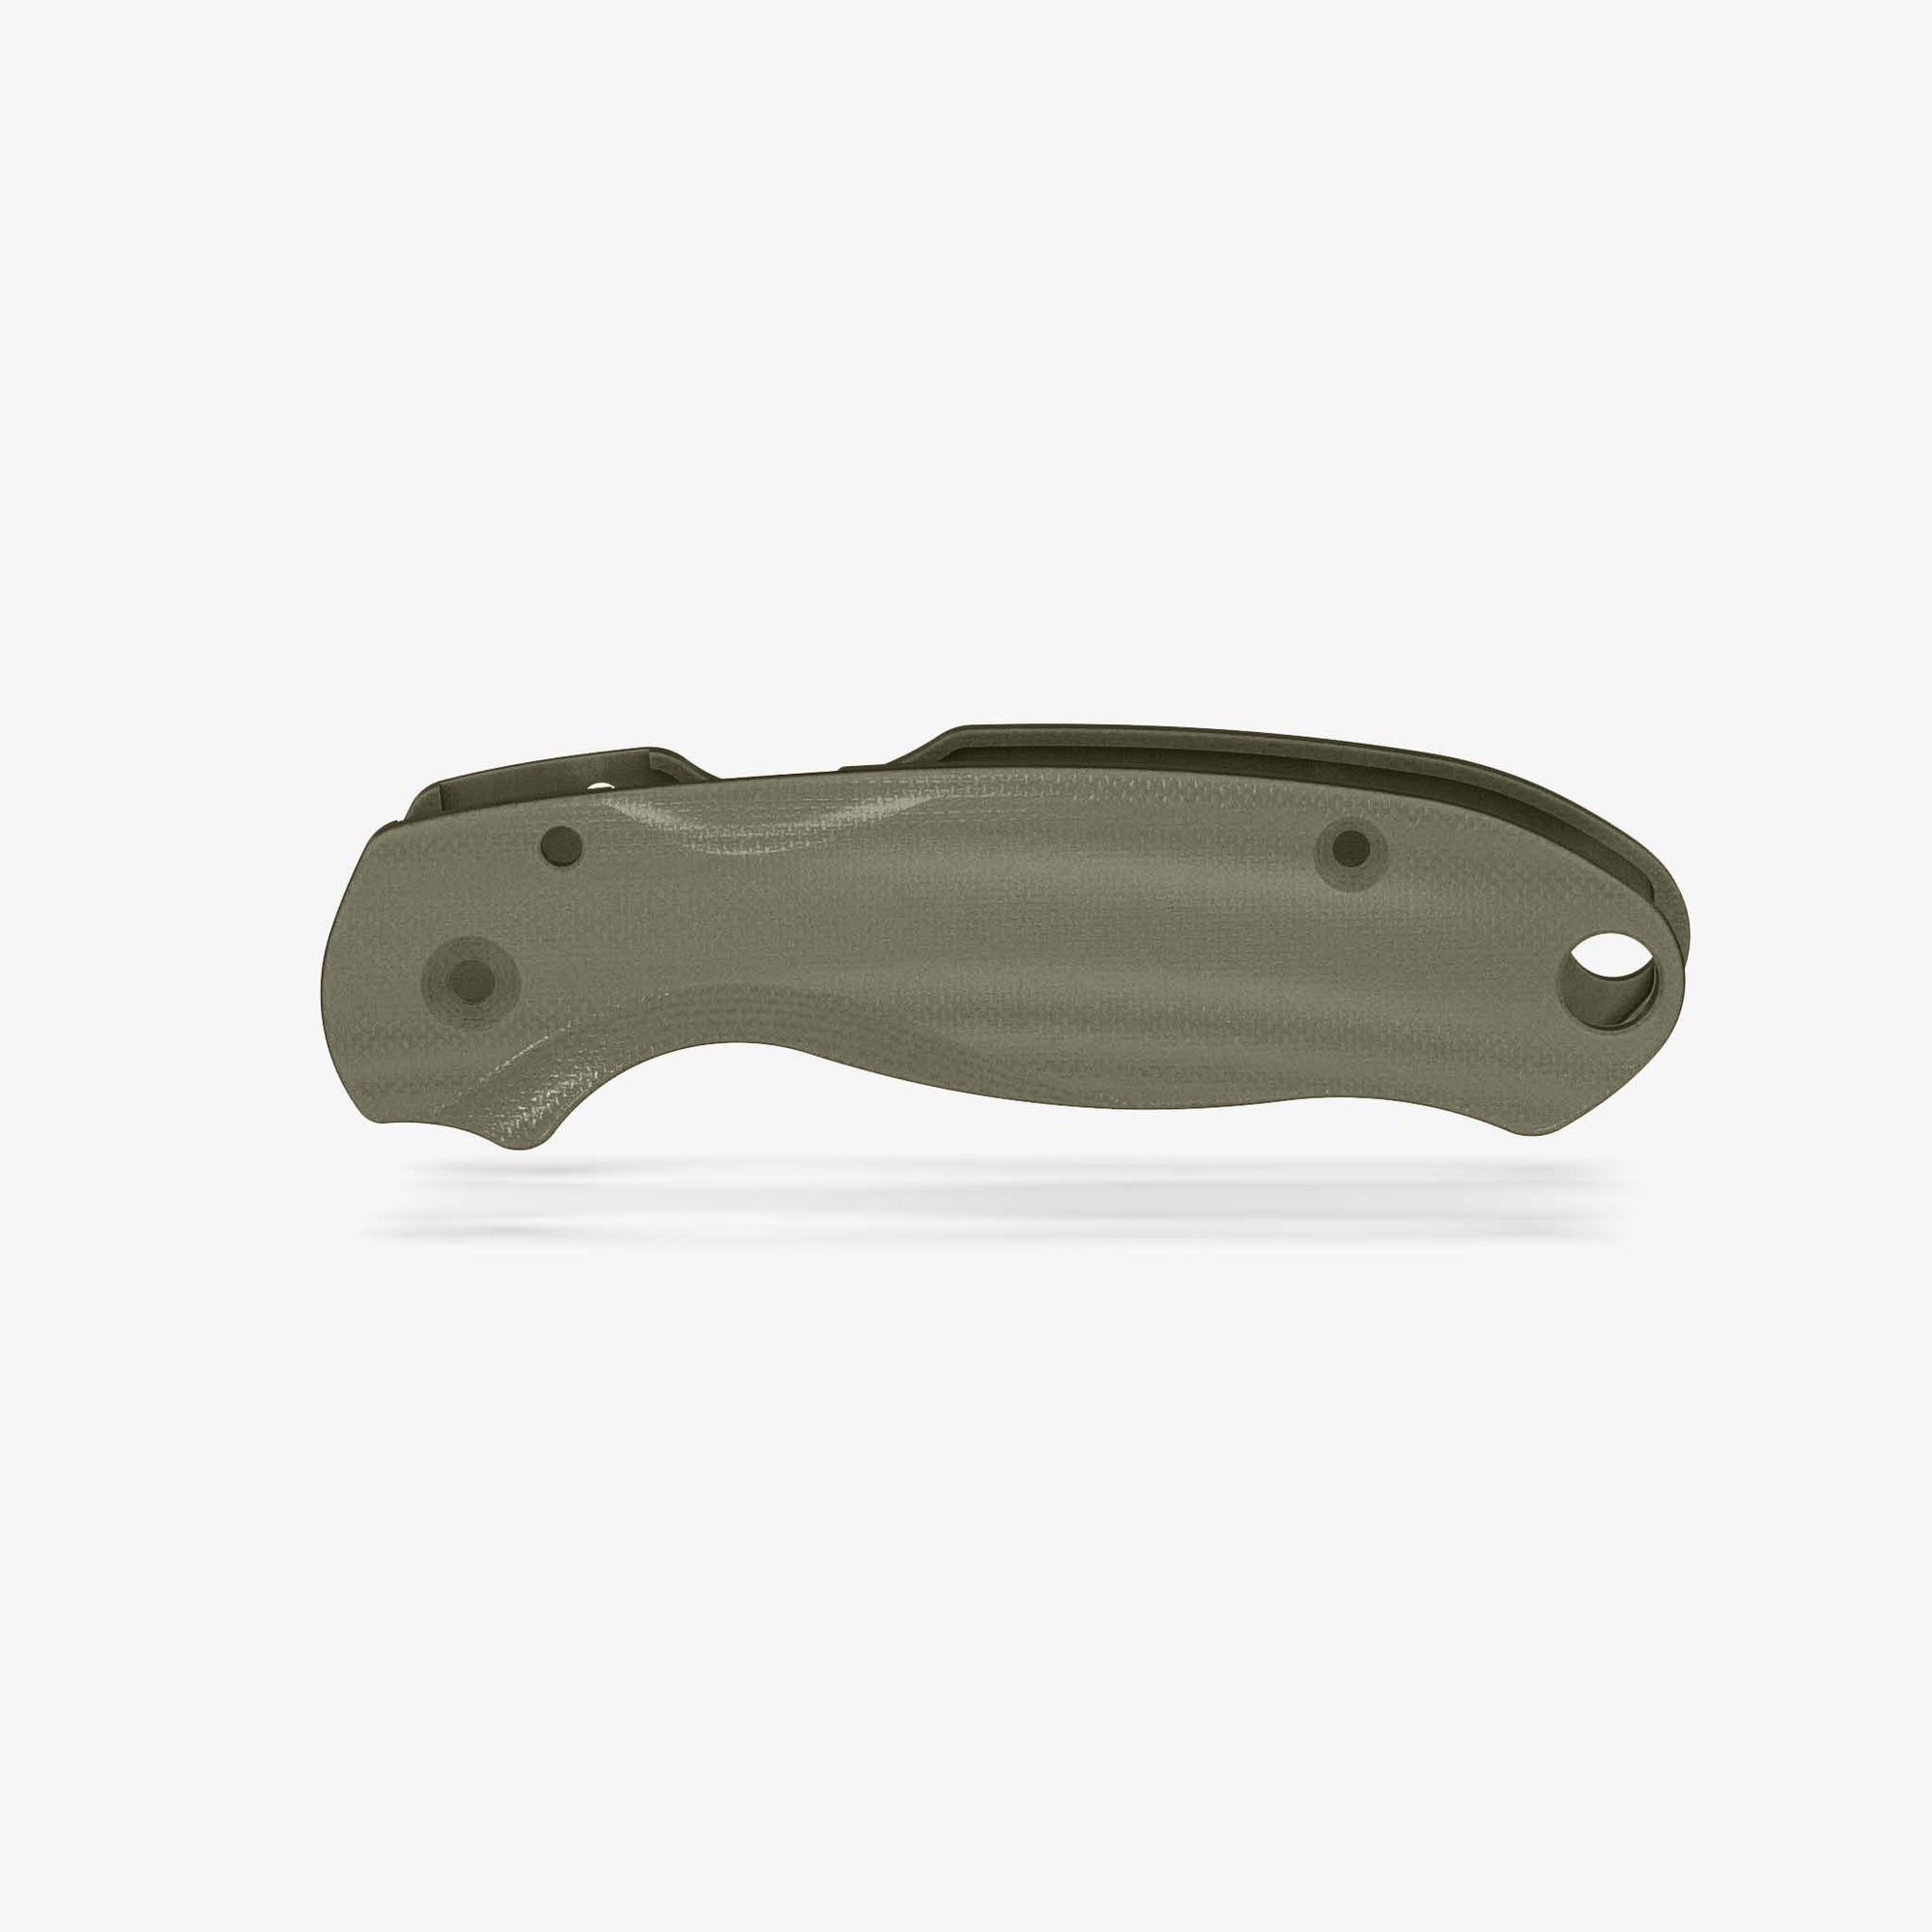 Lotus G-10 Scales for Spyderco Para 3 Knife